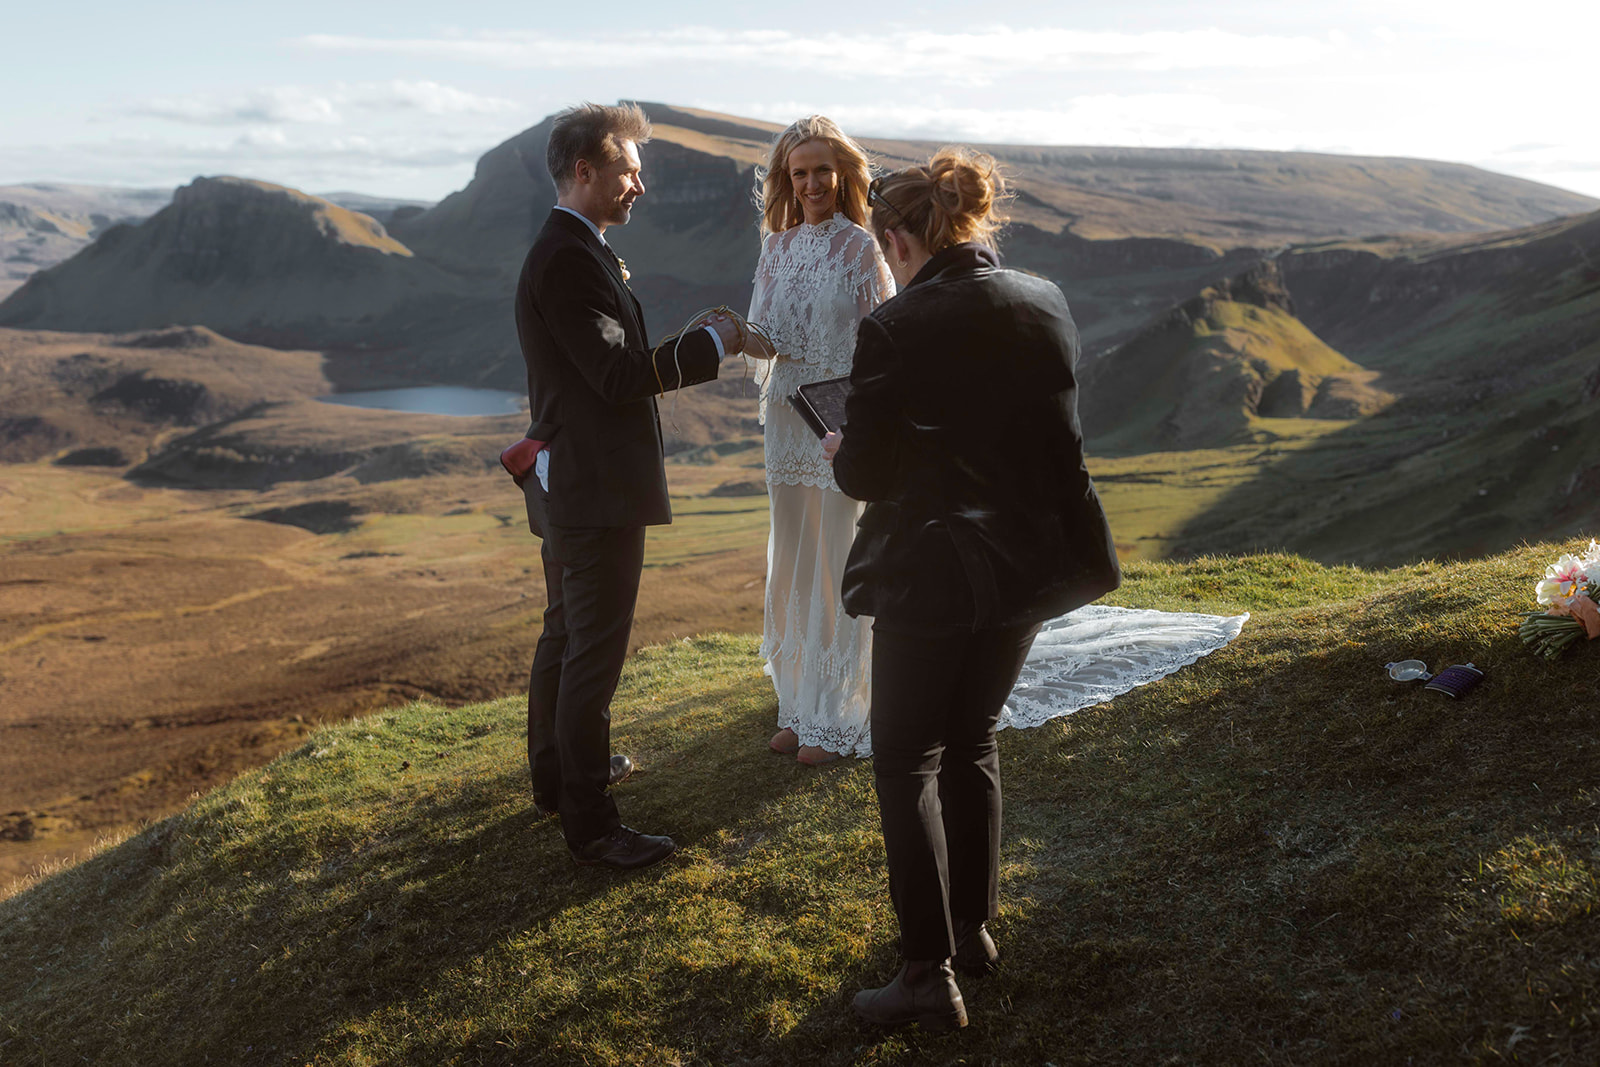 Amidst the breathtaking landscape of Isle of Skye, Kara and Andy exchanged vows in an intimate elopement ceremony.